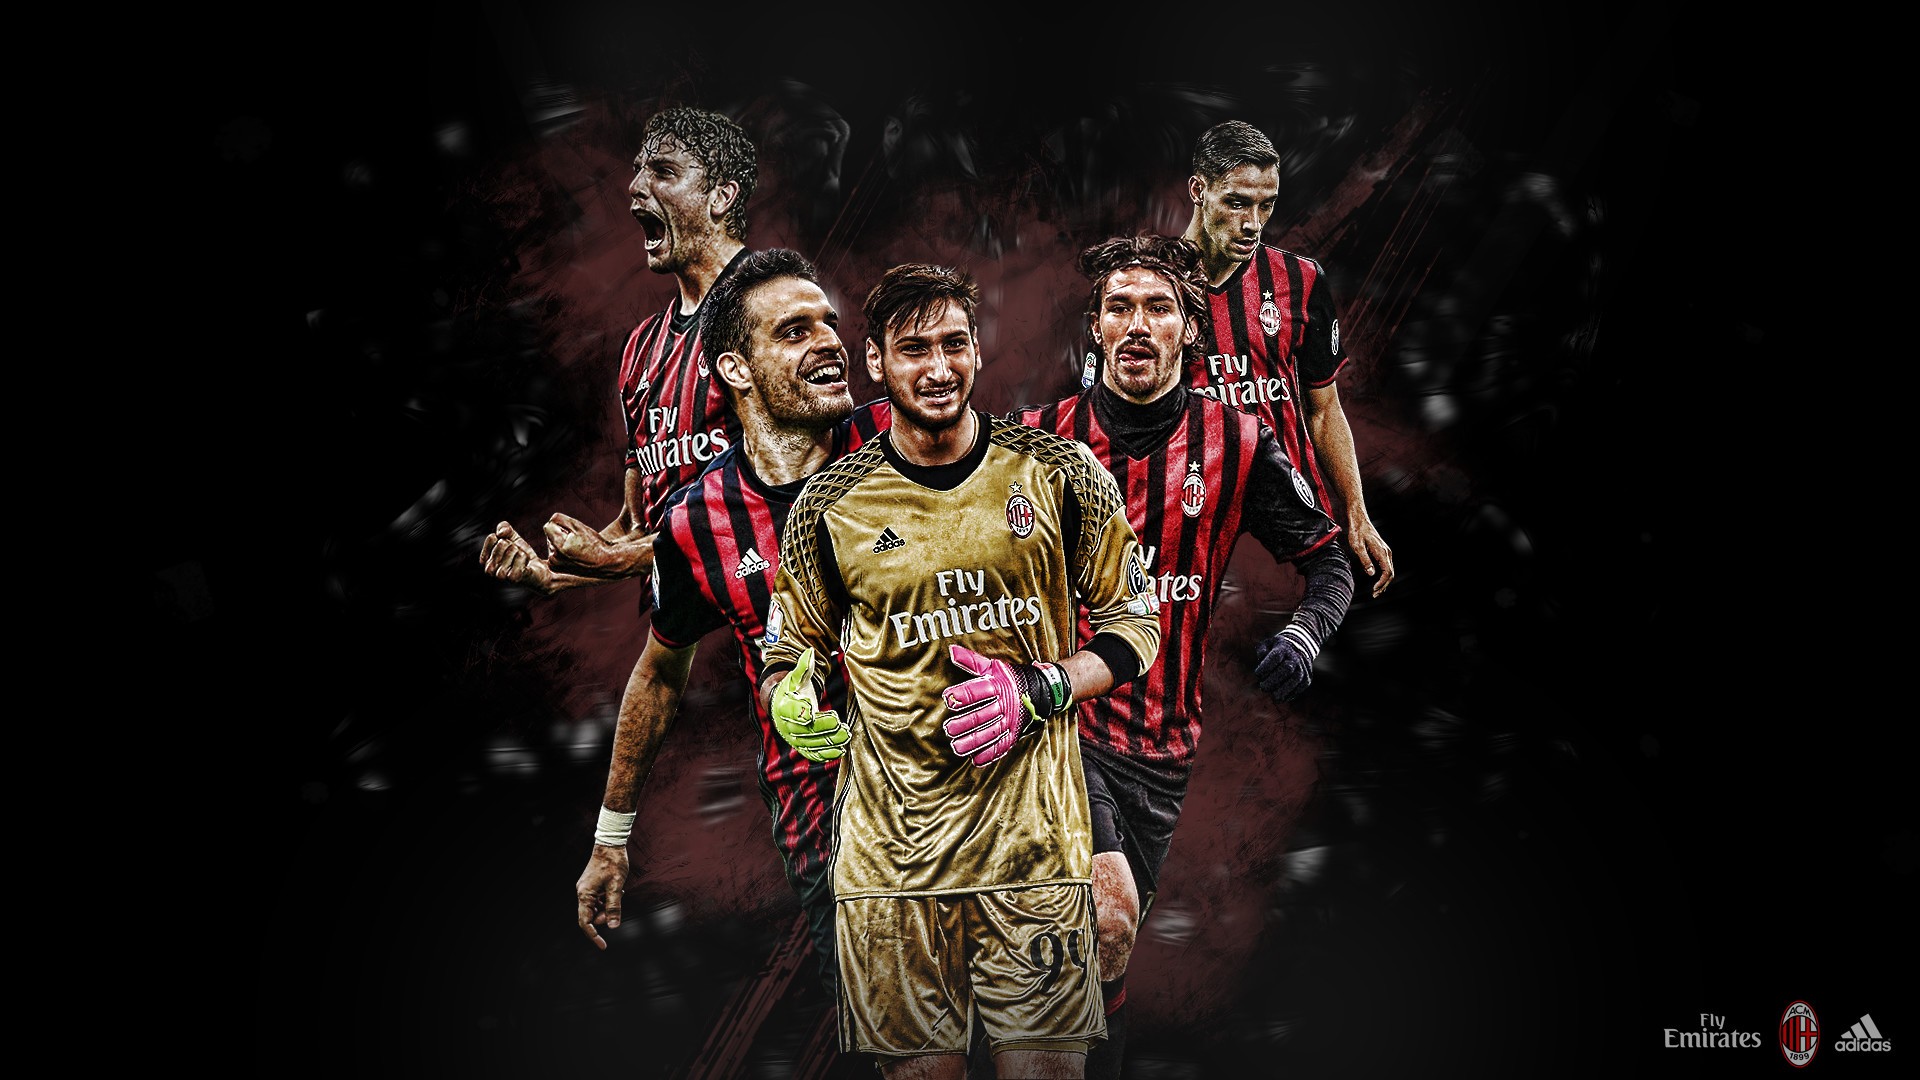 HD Backgrounds Milan With high-resolution 1920X1080 pixel. You can use this wallpaper for your Desktop Computers, Mac Screensavers, Windows Backgrounds, iPhone Wallpapers, Tablet or Android Lock screen and another Mobile device